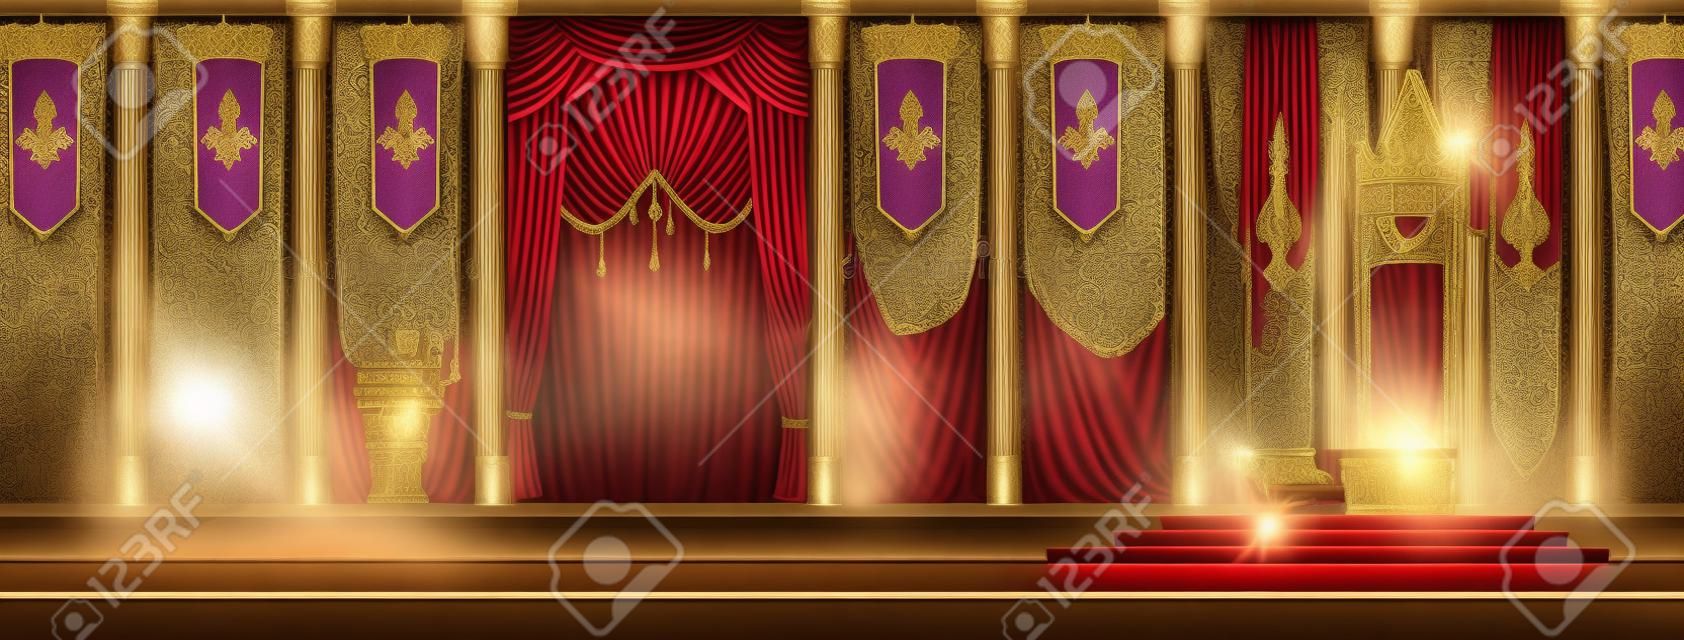 Medieval castle spacious throne hall or ballroom interior cartoon vector. Red carpet path to kings throne on pedestal, curtains on window, flags with royal emblem on walls, knights armors illustration